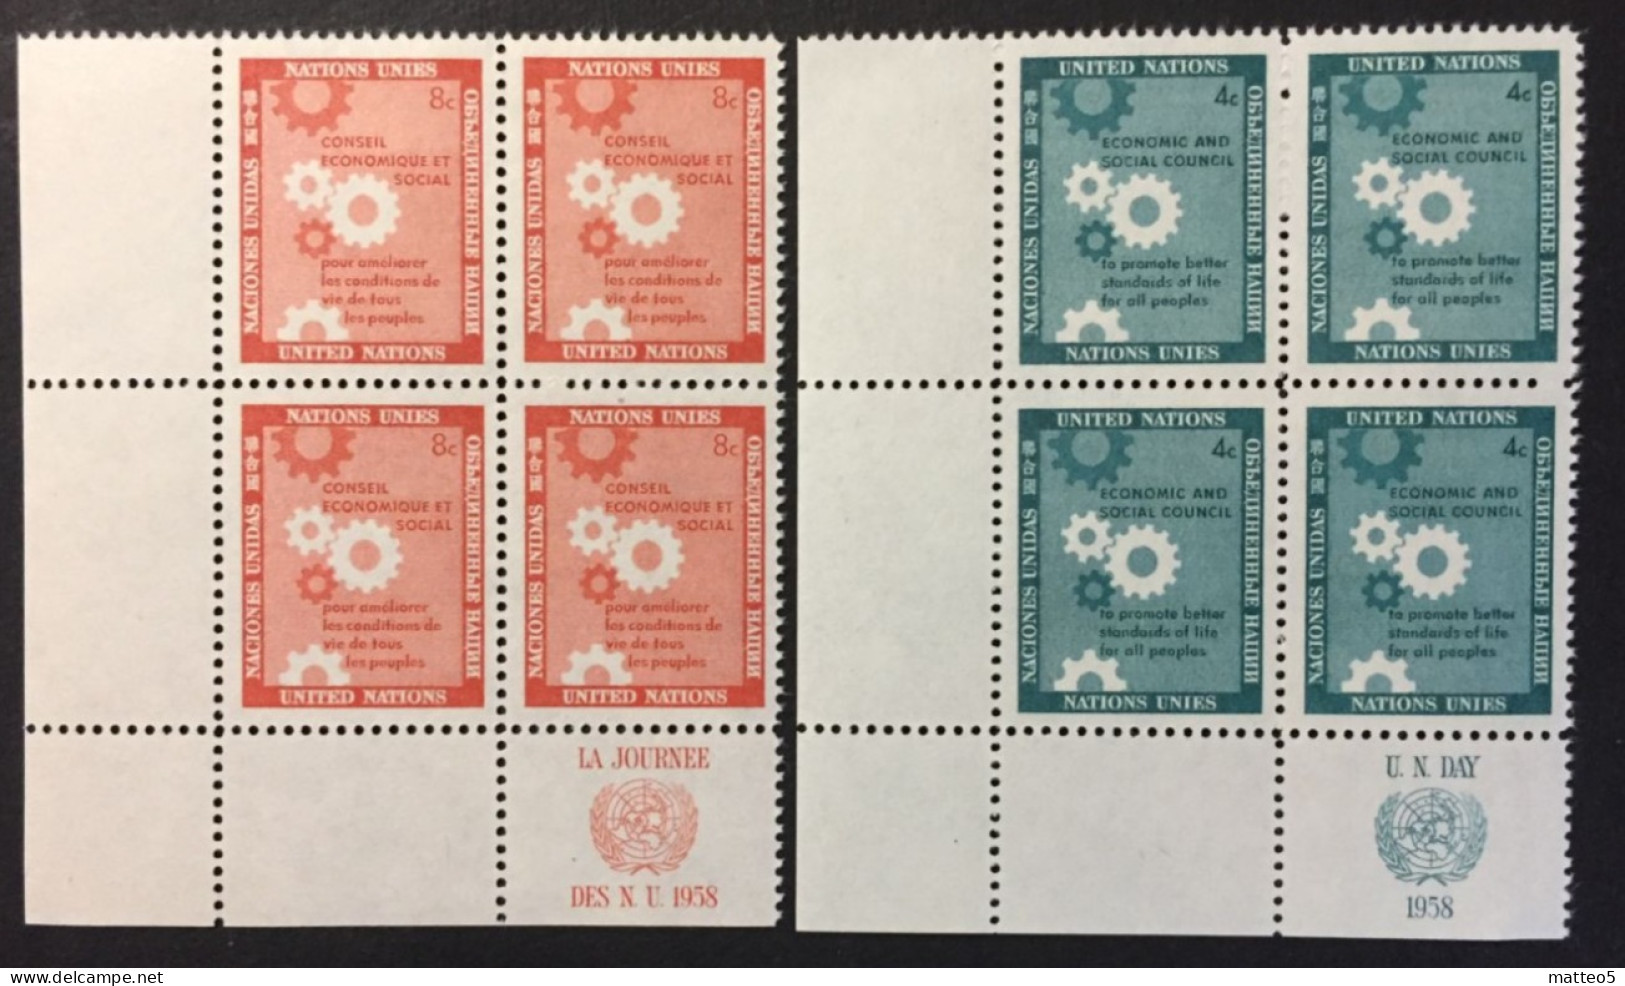 1958 - United Nations UNO UN ONU - Economic  And Social Council, Gearwheels - 2x4 Stamps   Unused - Unused Stamps